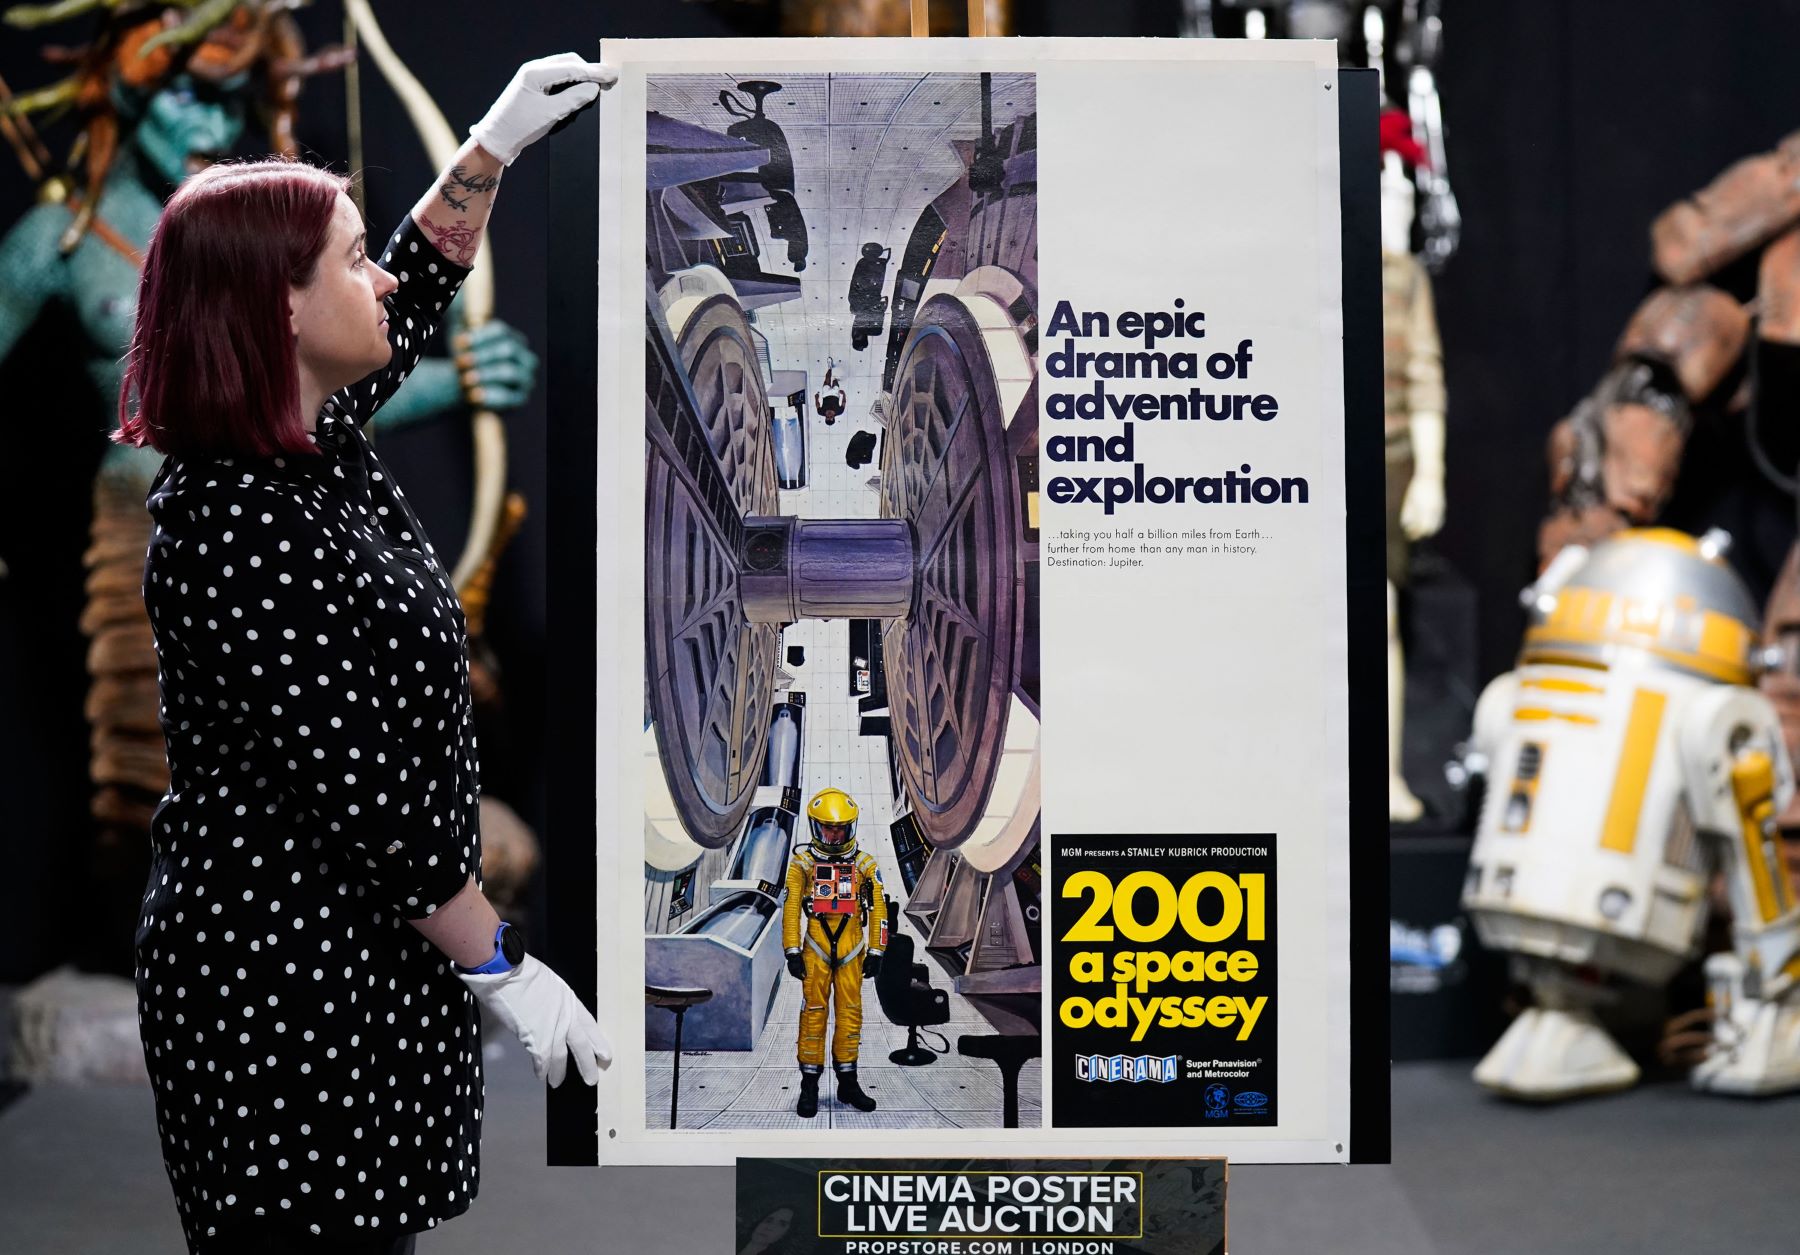 '2001 A Space Odyssey' movie poster at the Prop Store auction house in Rickmansworth, Hertfordshire